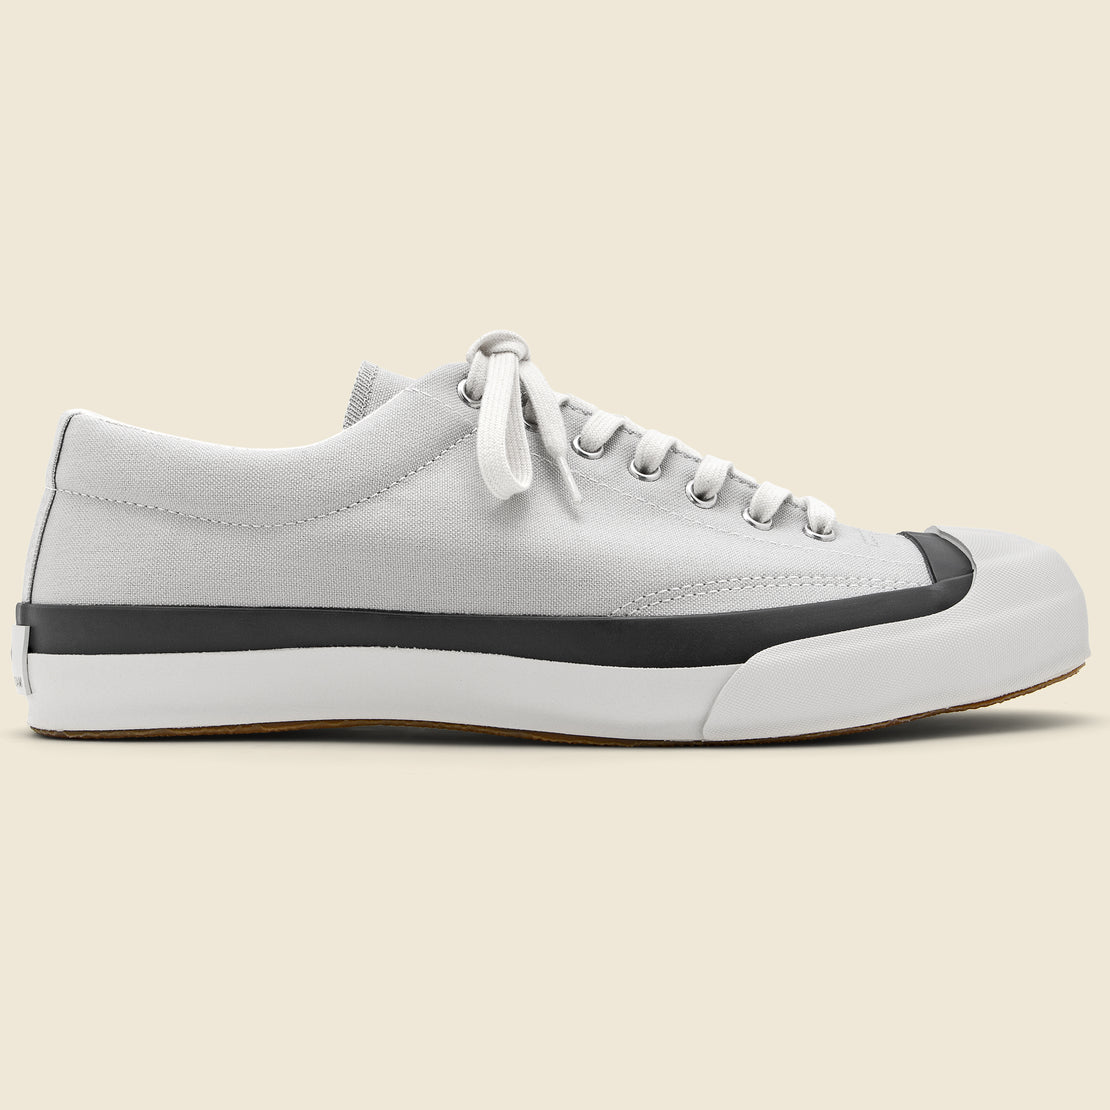 Shoes Like Pottery Moonstar Gym Court Sneaker - Light Grey